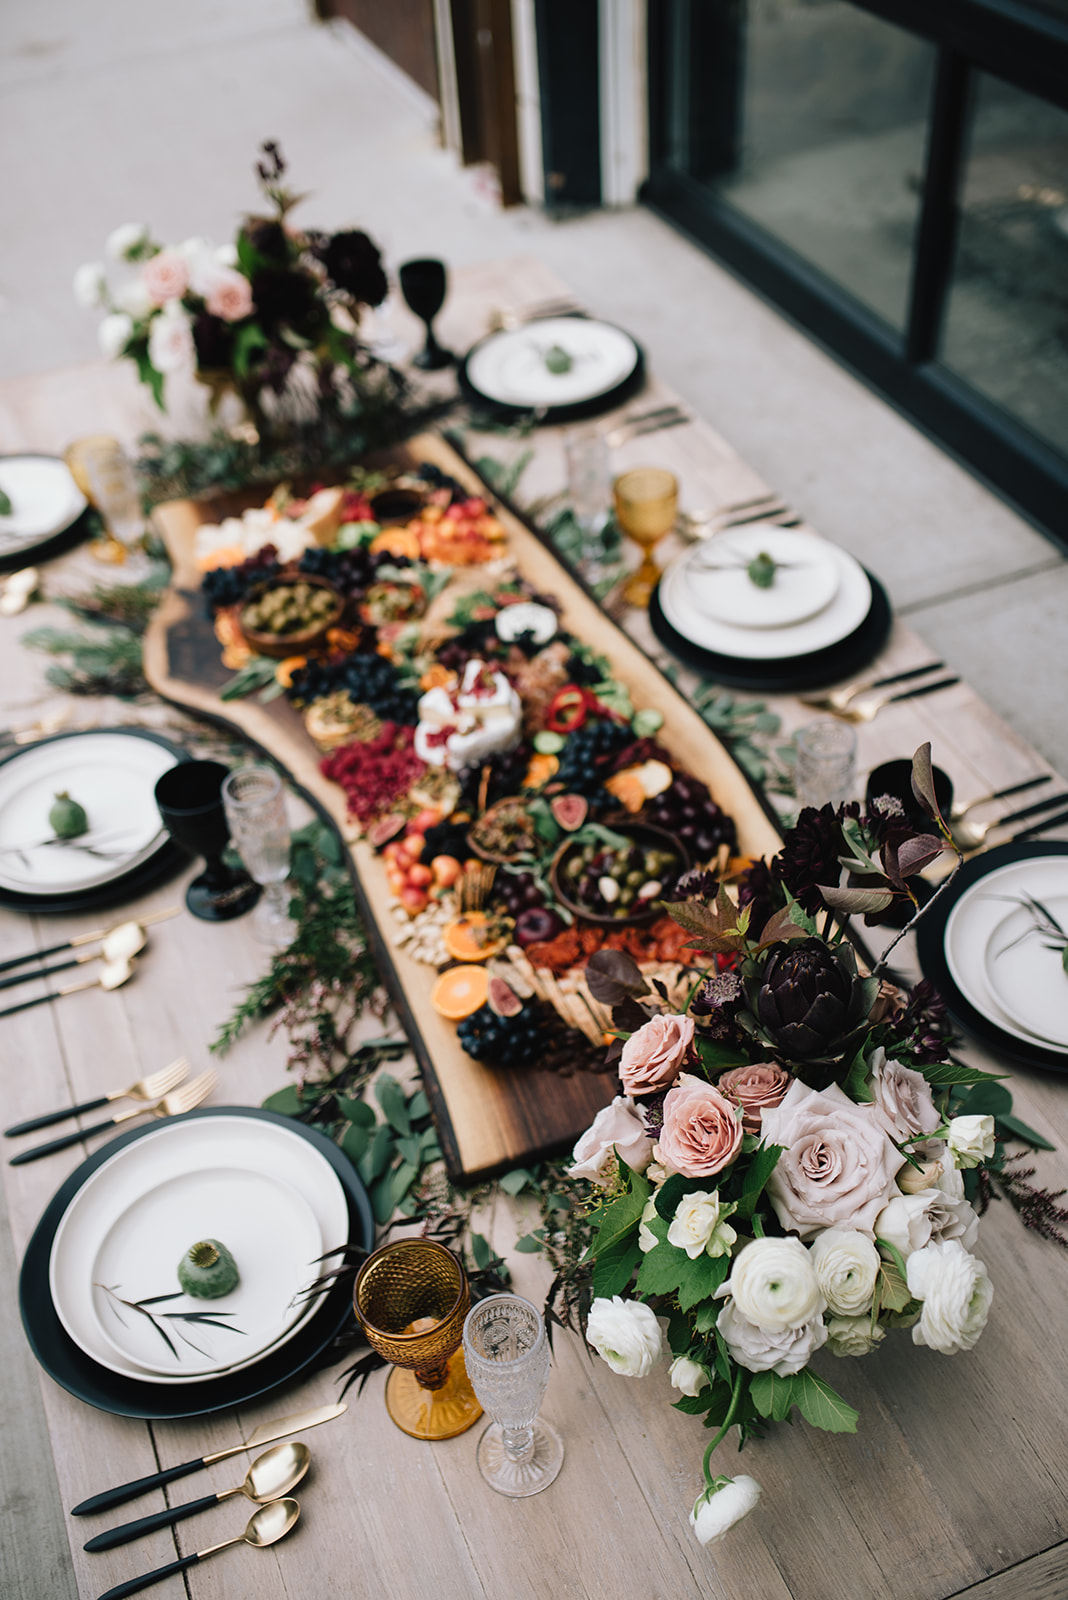 Wedding Table & Styling Inspiration - local wedding advice and inspiration featured on Bronte Bride